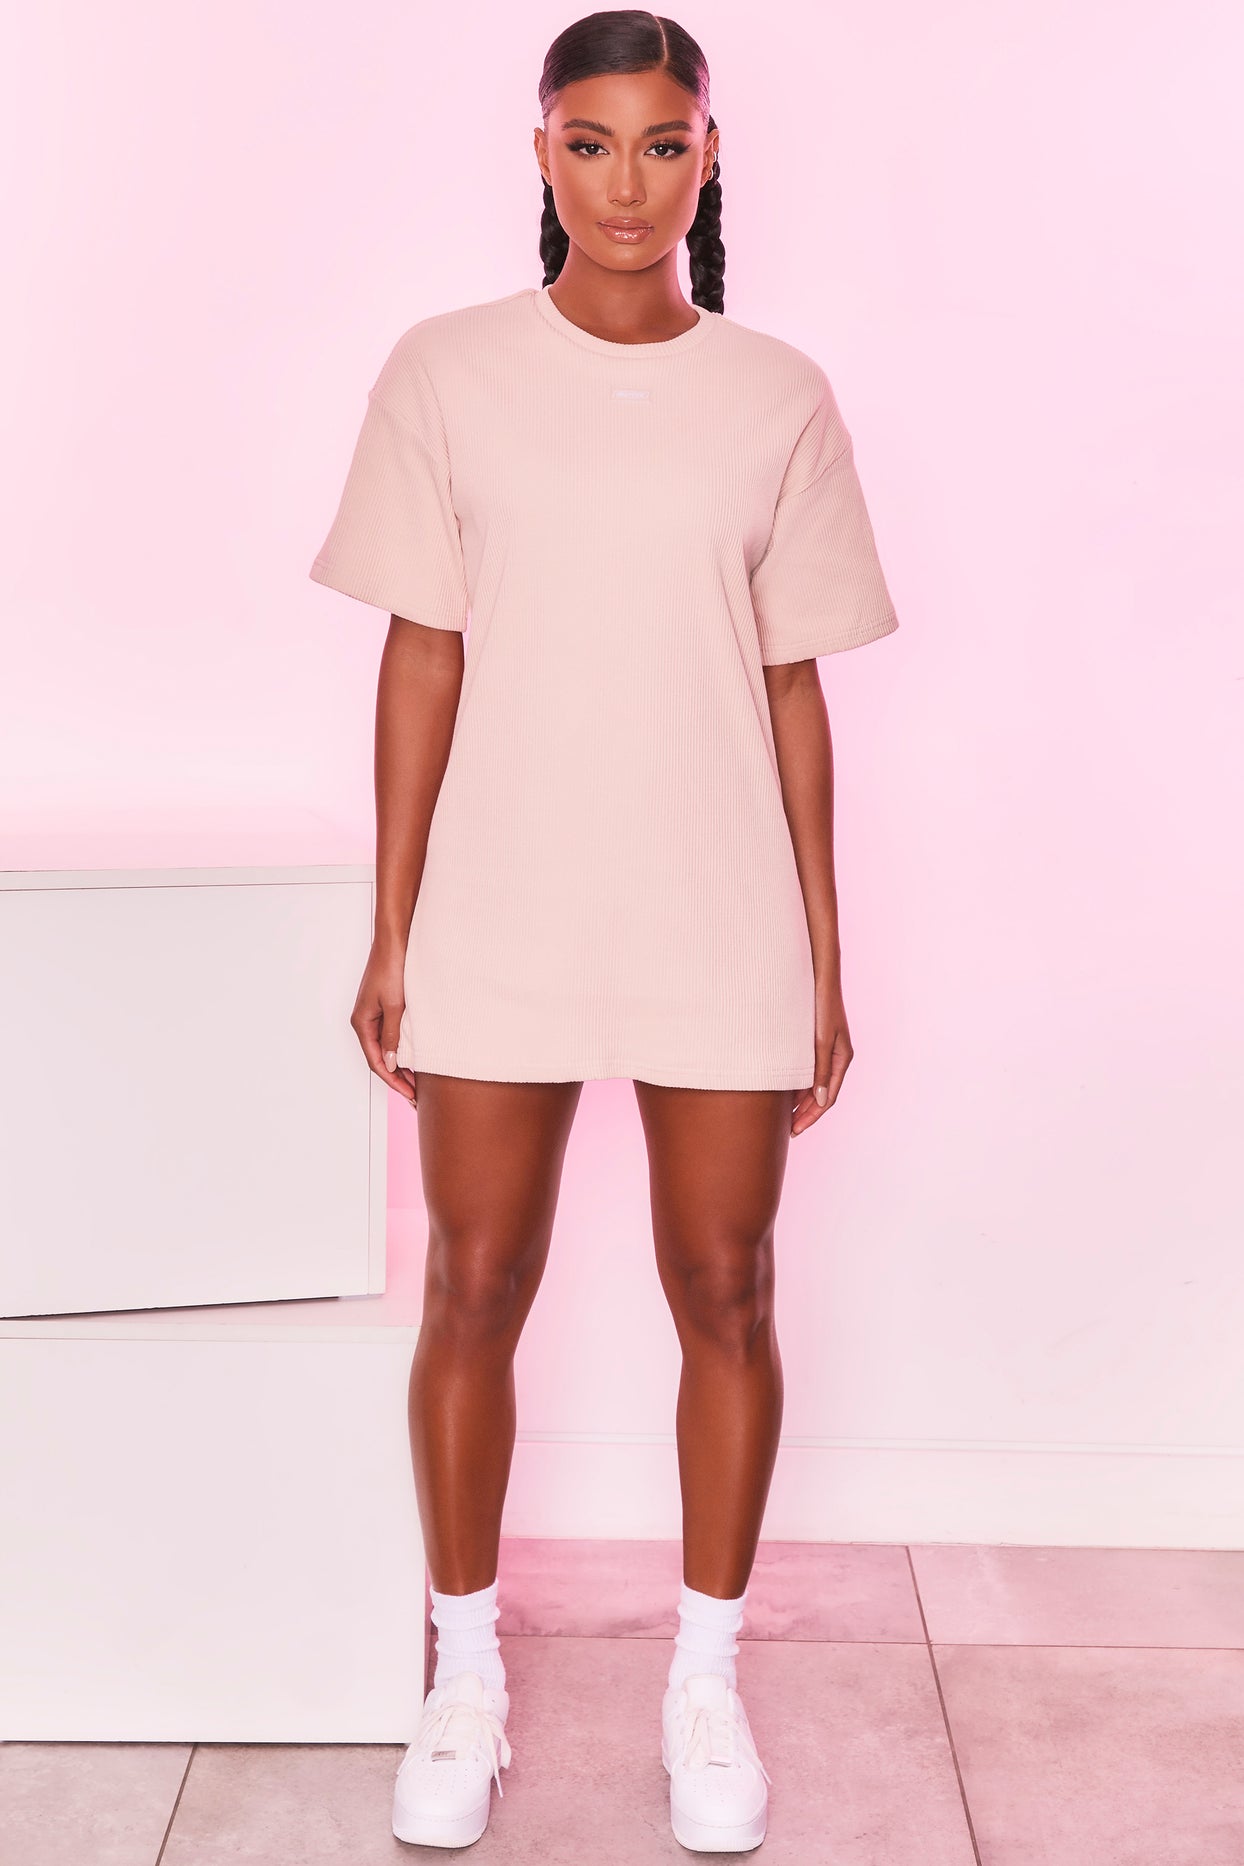 Take It Easy Ribbed Oversized T-Shirt in Cream